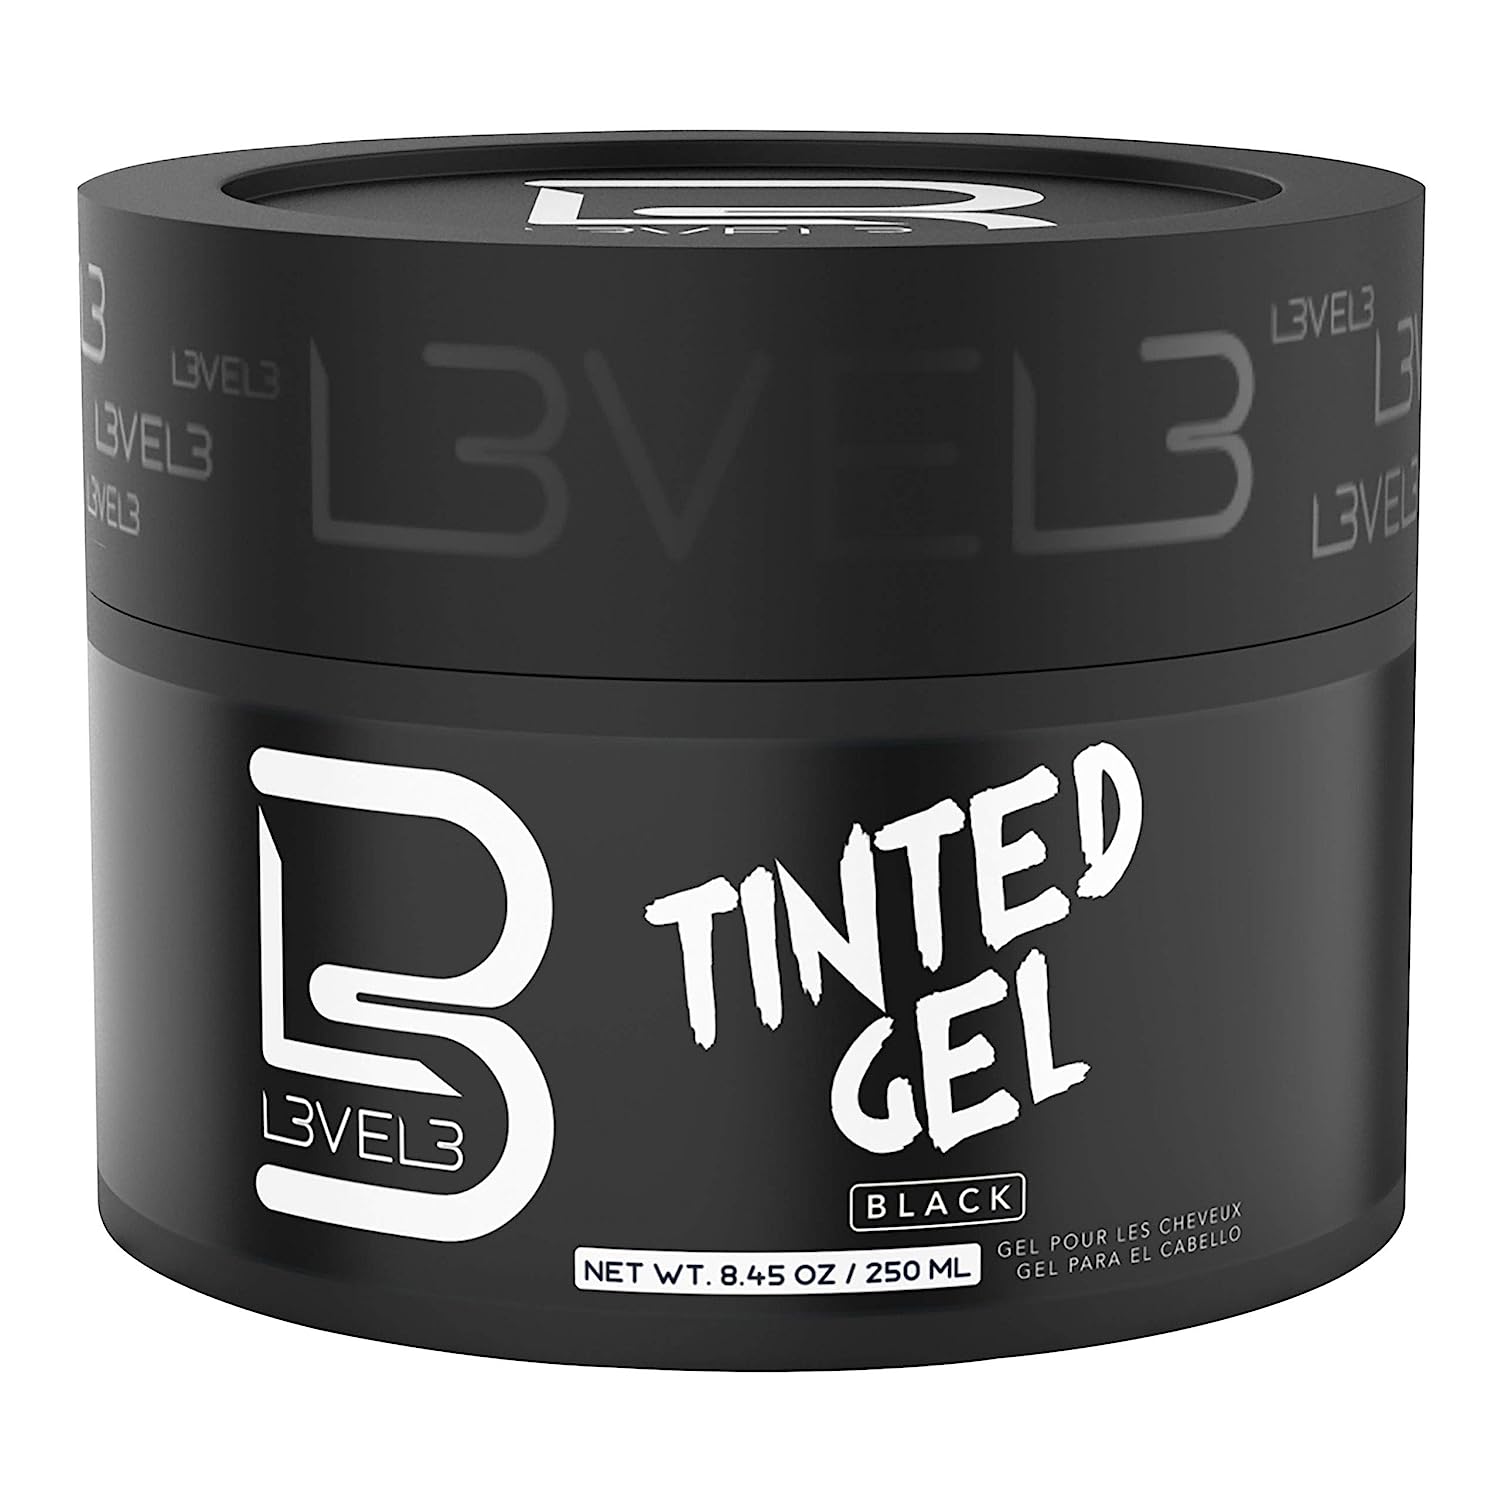 Level 3 Tinted Gel Black - Temporary Black Hair Gel For Hair L3 - No aking and Rinses Out Easily - Level Three Strong Hold Formula